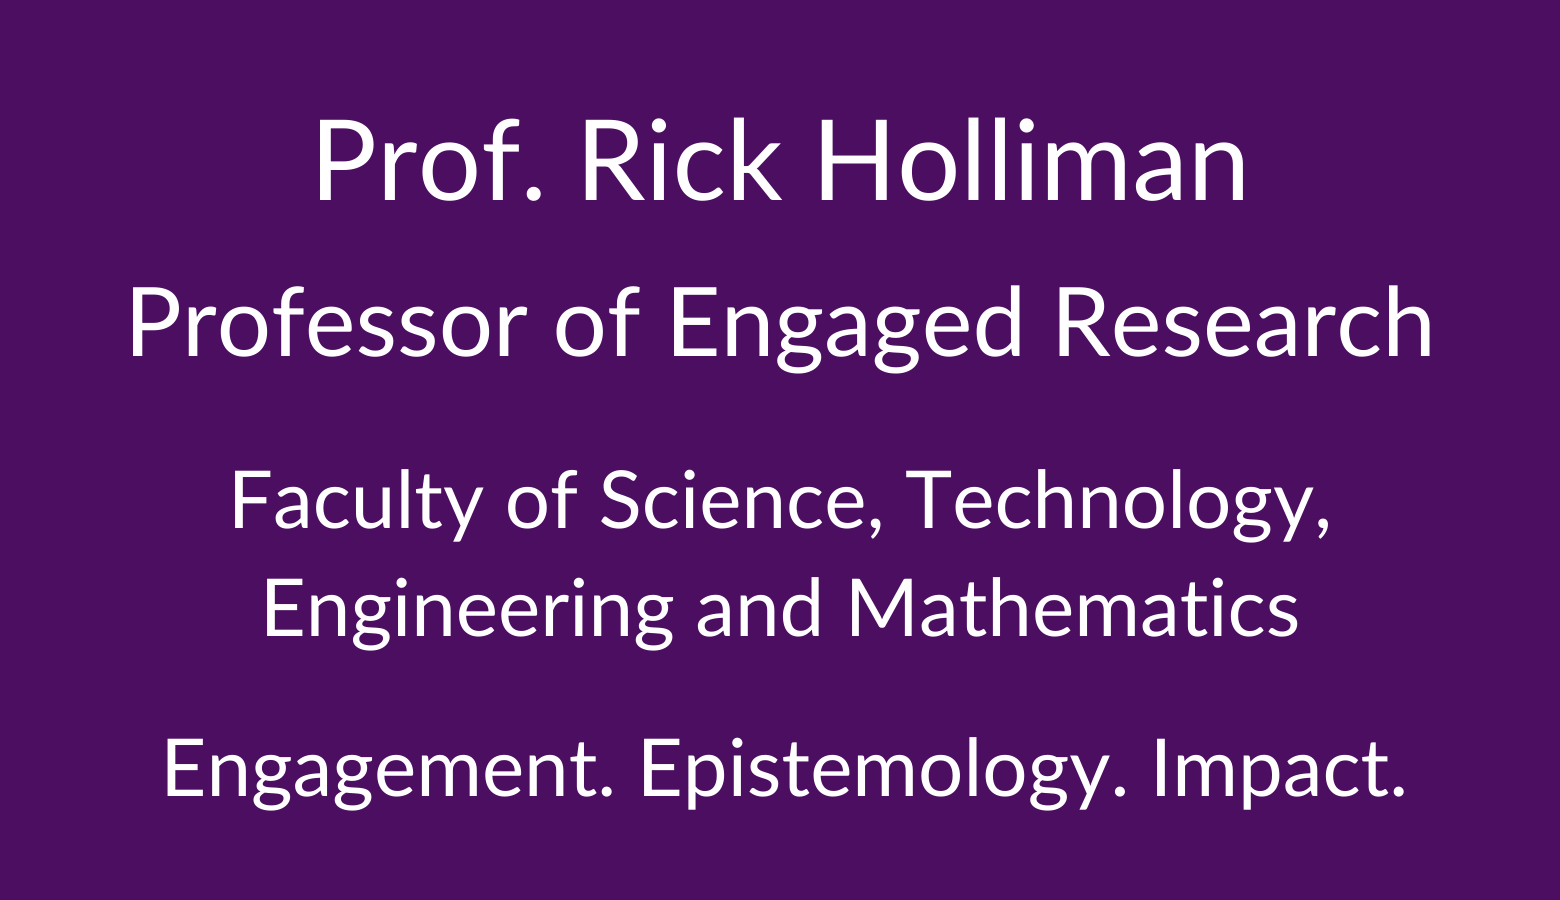 Professor Rick Holliman. Professor of Engaged Research. Faculty of Science. Technology, Engineering and Mathematics. Engagement. Epistemology. Impact